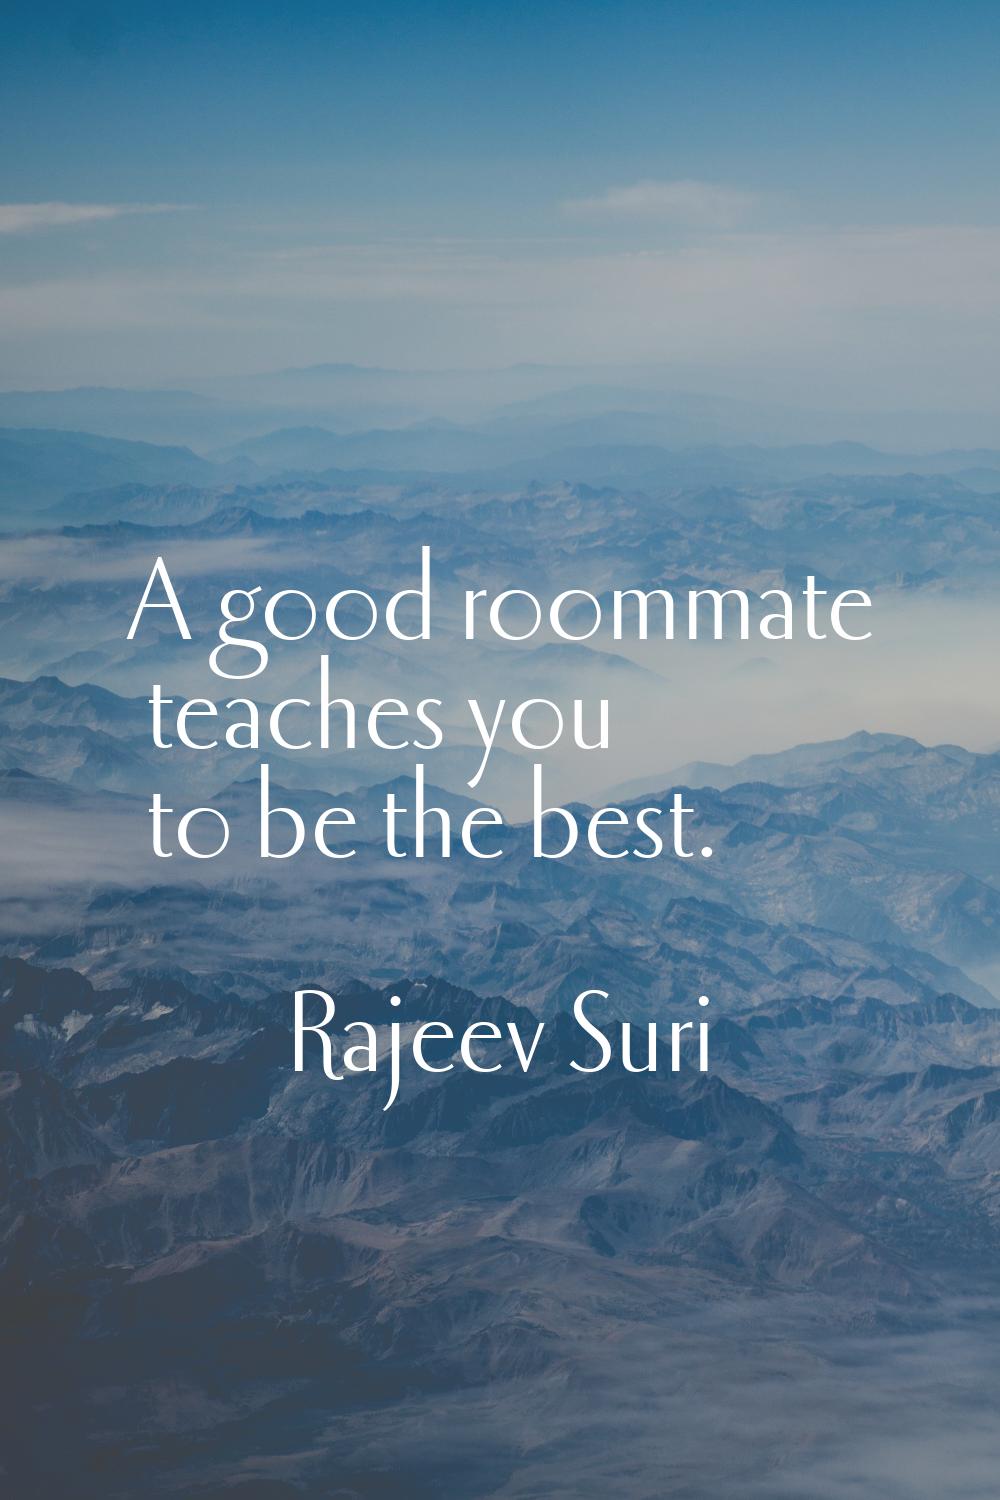 A good roommate teaches you to be the best.